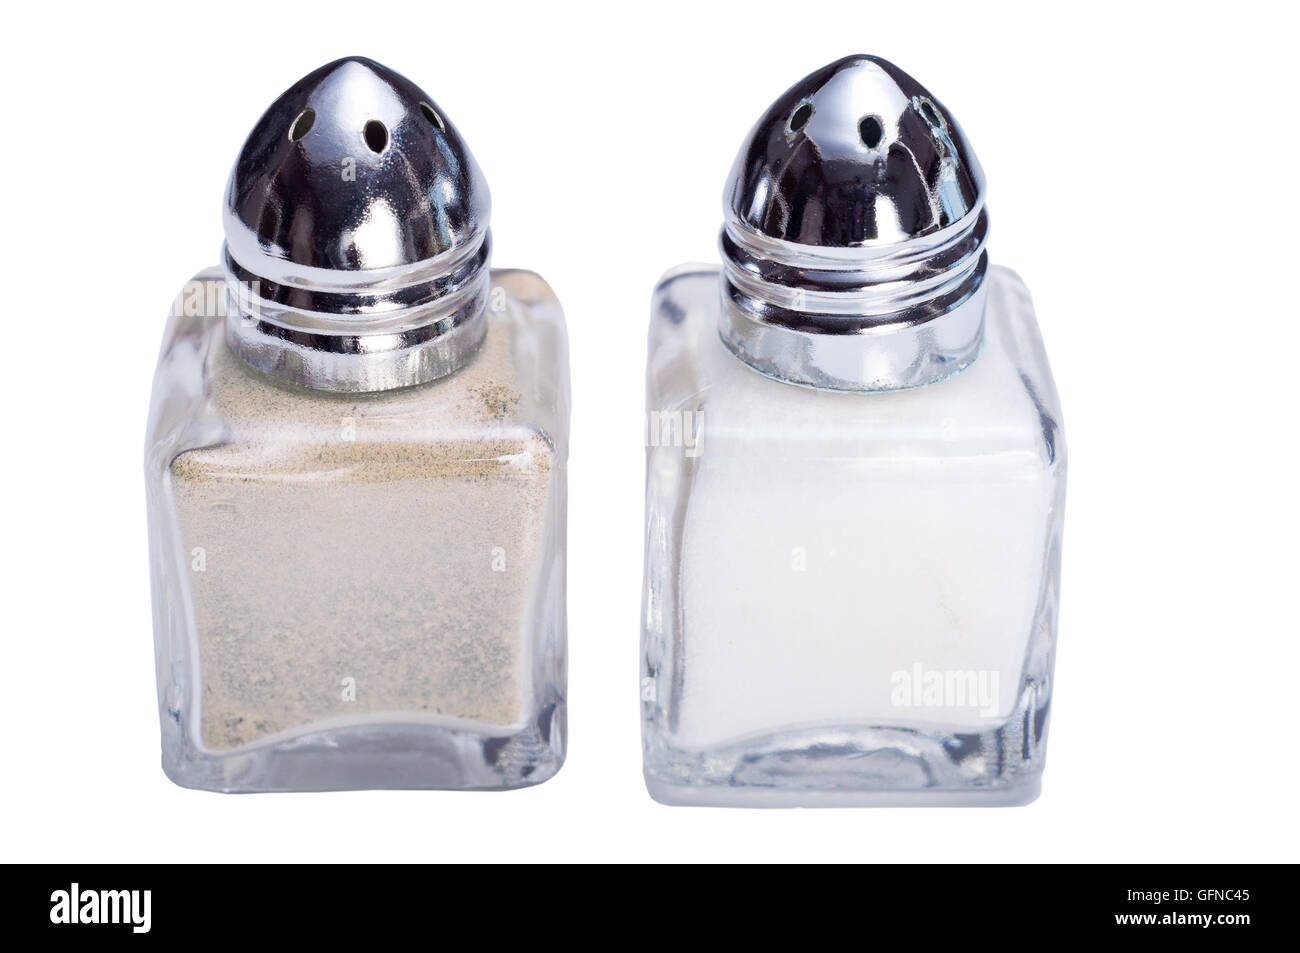 Closeup photograph of small silver and glass salt and pepper cellars Stock Photo